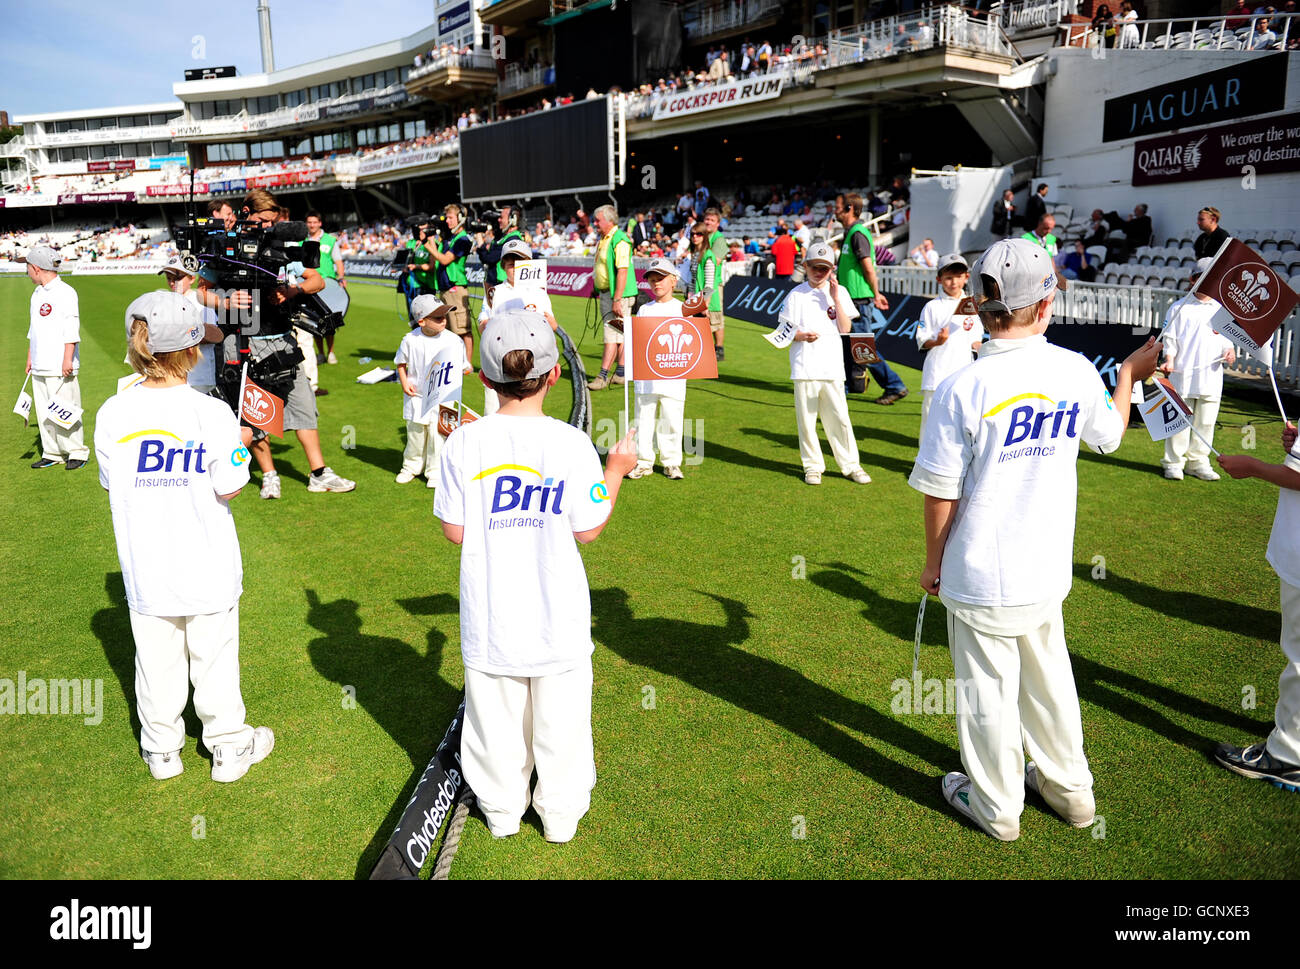 Cricket - Clydesdale Bank 40 - Group A - Surrey v Worcestershire - The Brit Insurance Oval. Mascots form a guard of honour for the players Stock Photo